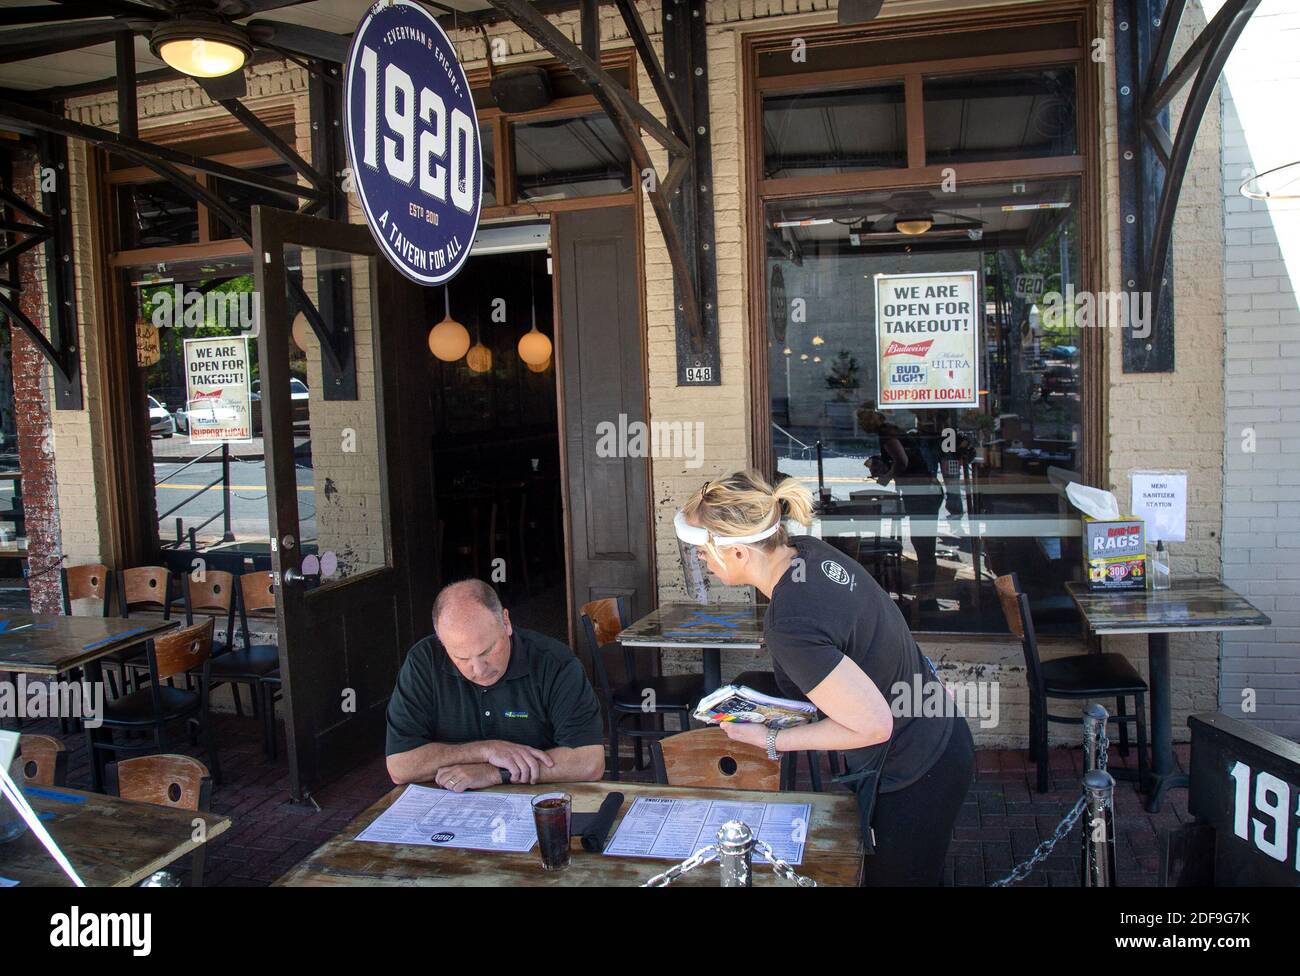 NO FILM, NO VIDEO, NO TV, NO DOCUMENTARY - 1920 Tavern employee Elizabeth Bobo takes a lunch order at the Roswell restaurant Monday, April 27, 2020. Photo by Steve Schaefer/Atlanta Journal-Constitution/TNS/ABACAPRESS.COM Stock Photo